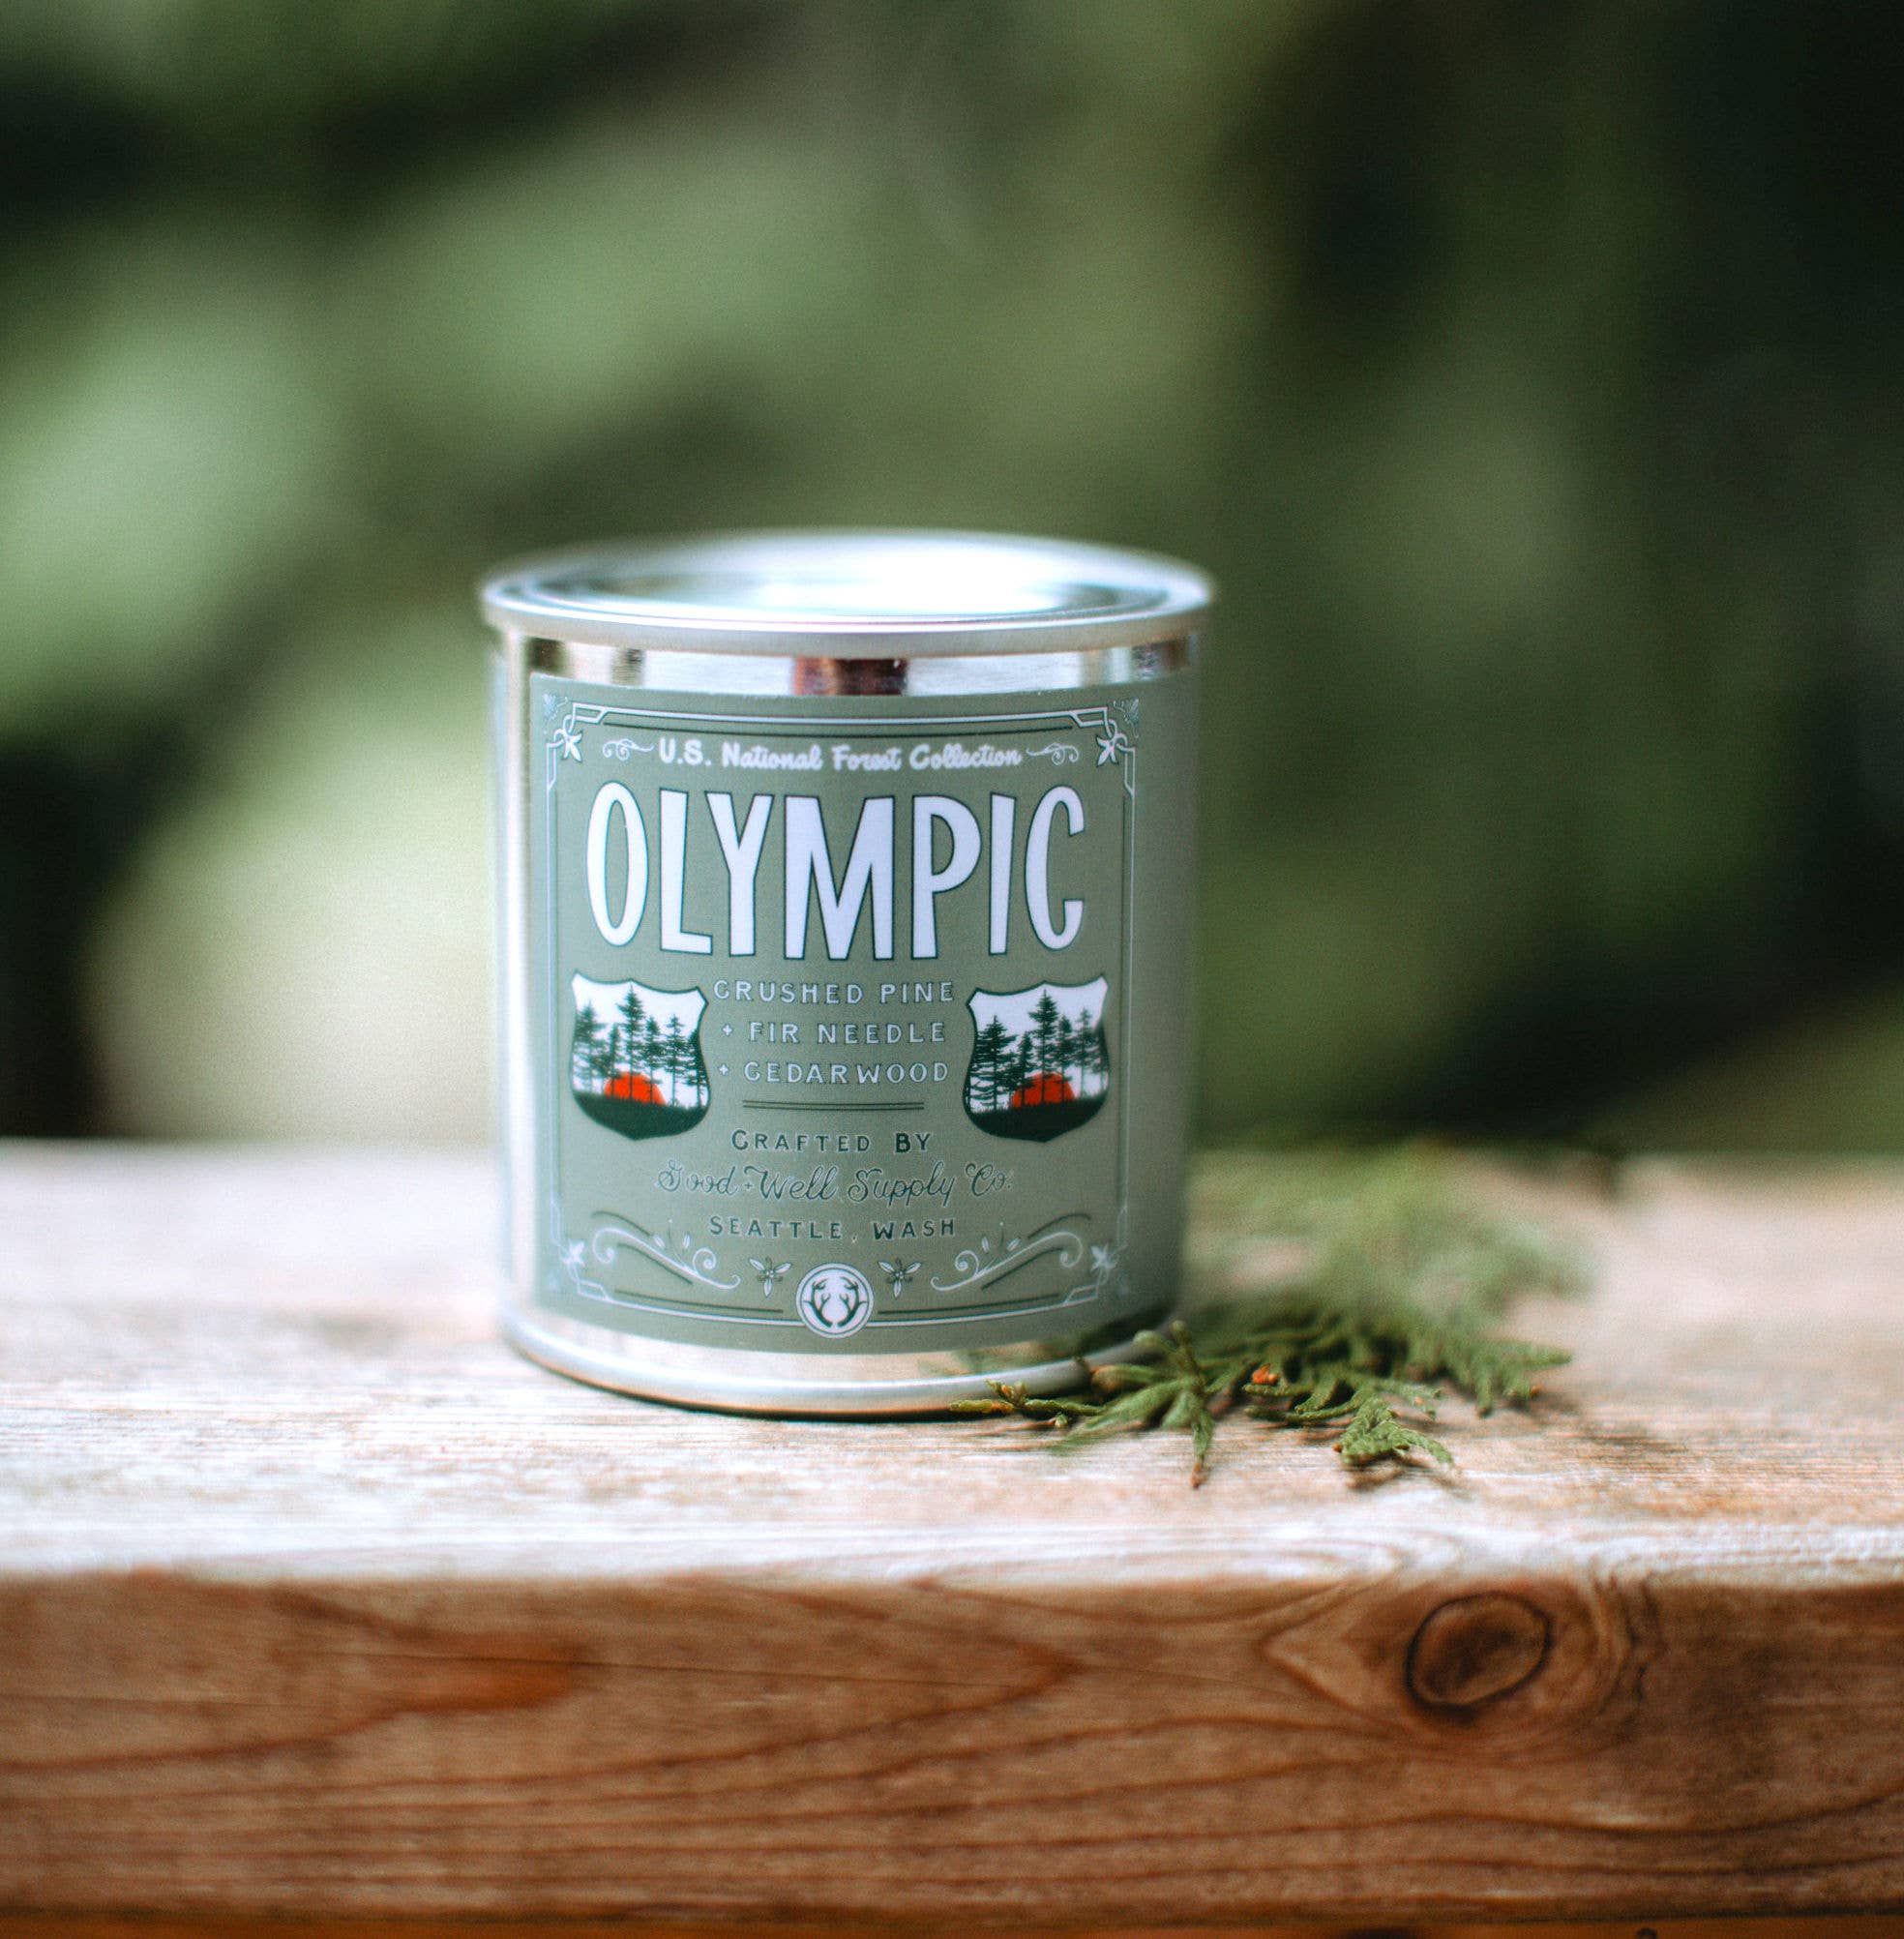 National Forest Candle: Olympic